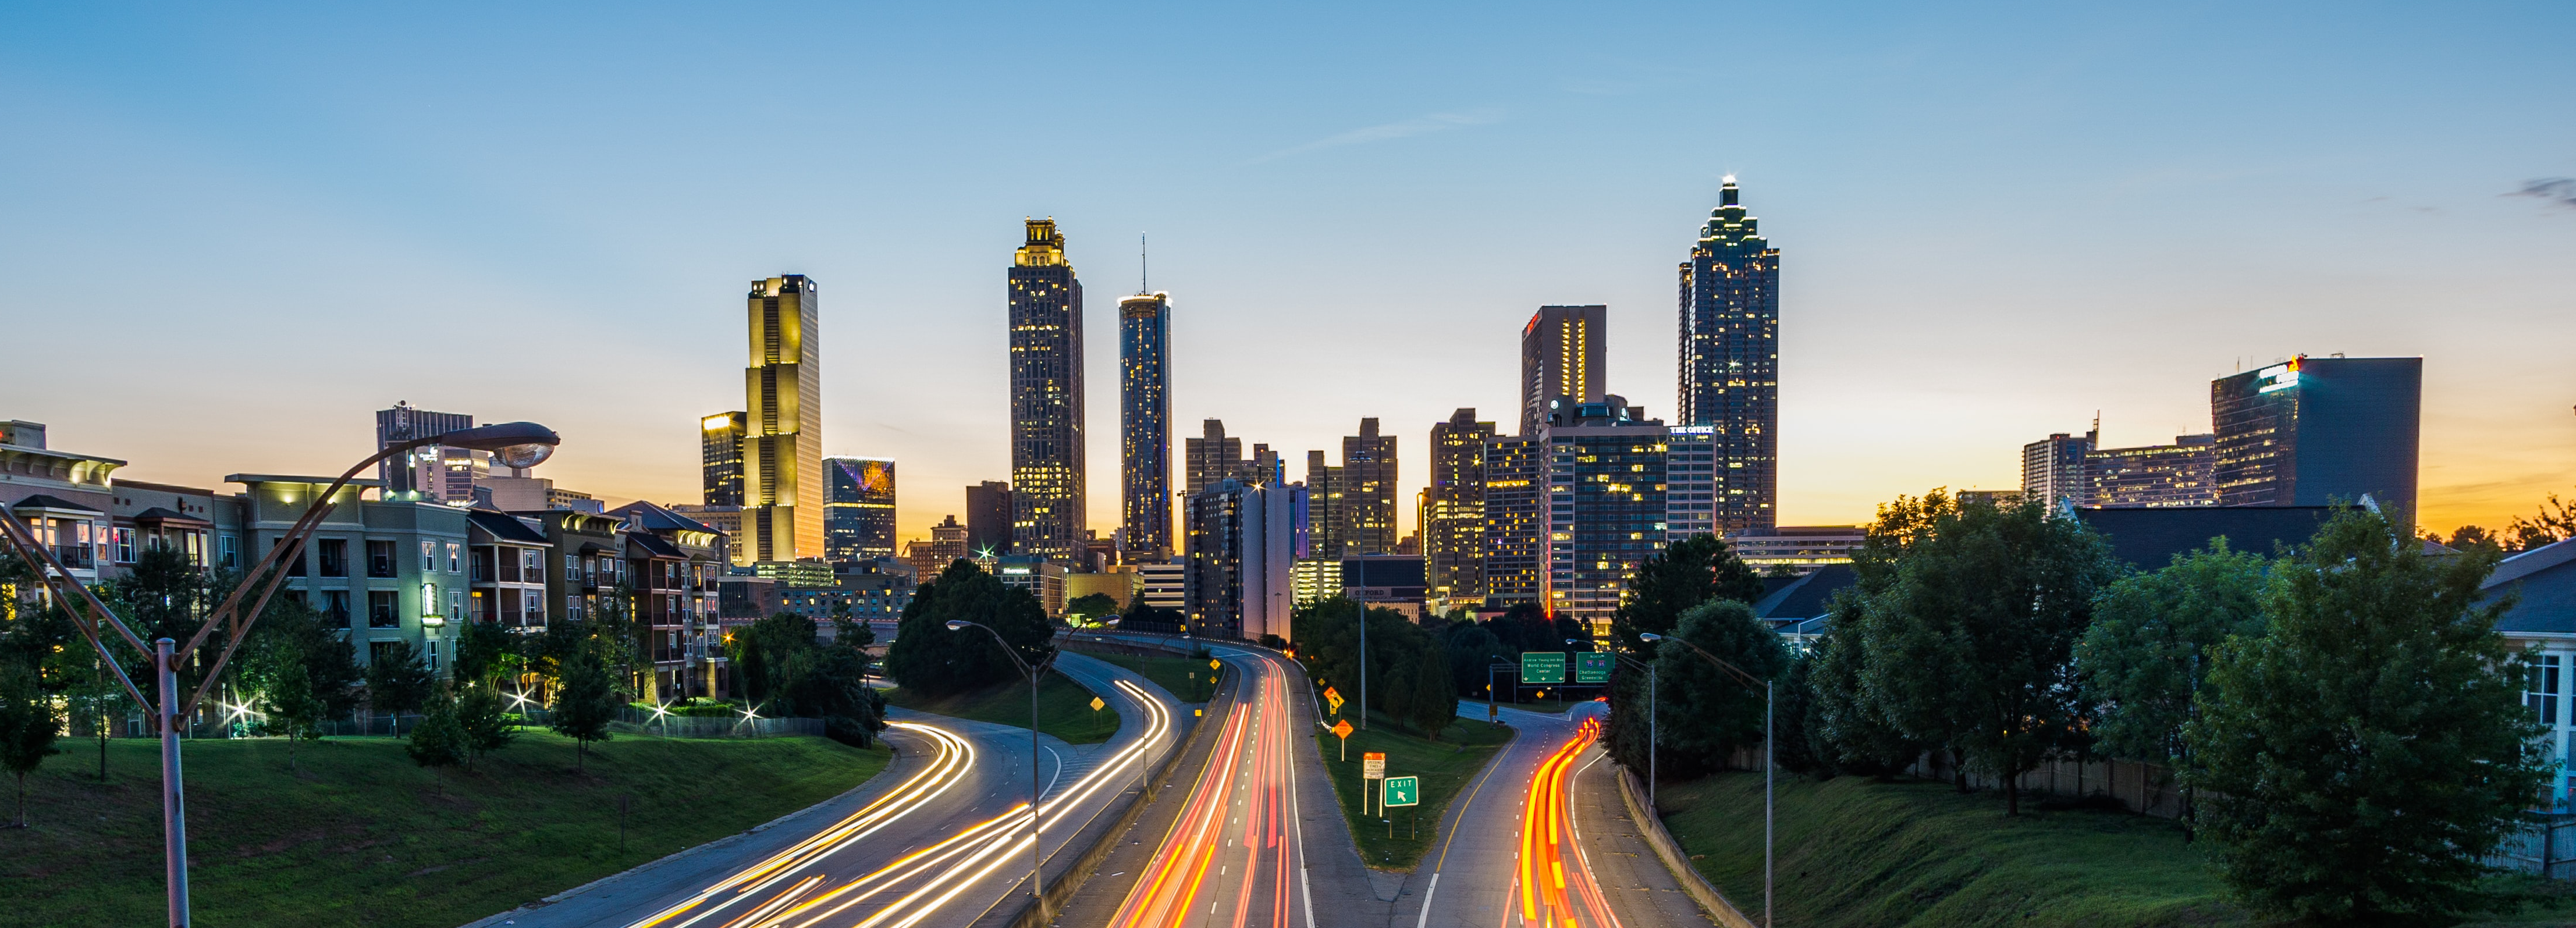 A timelapse view of highways at sunset against the Atlanta skyline.